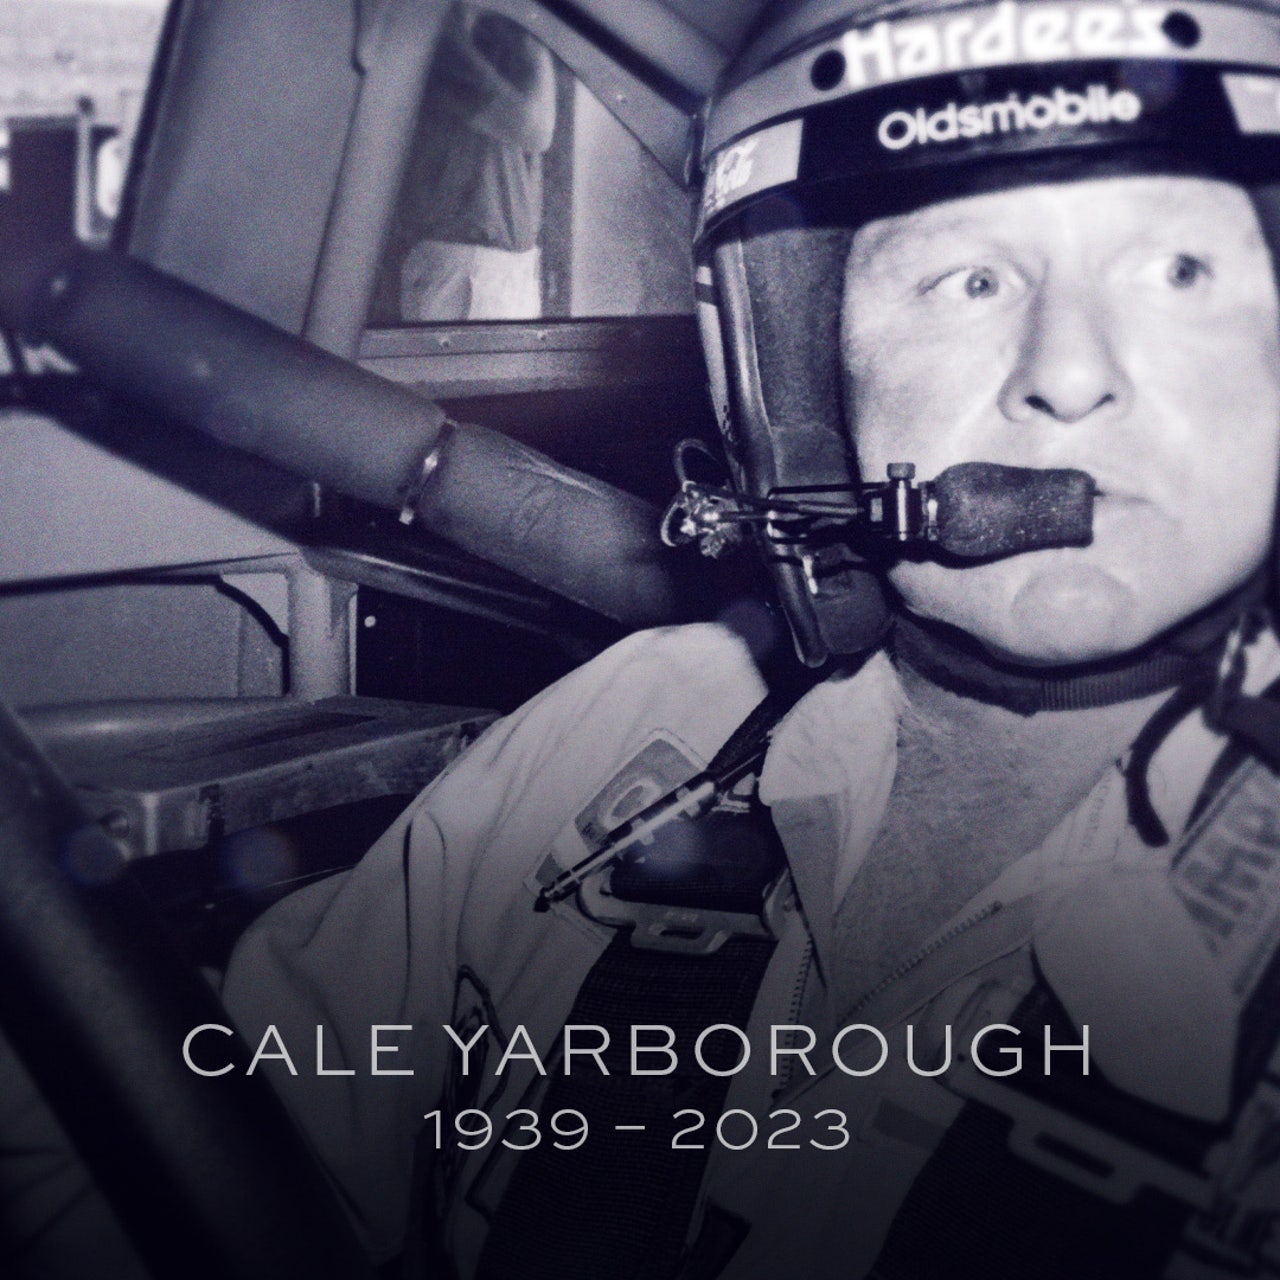 Cale Yarborough, NASCAR legend and 3-time champion, dies at 84